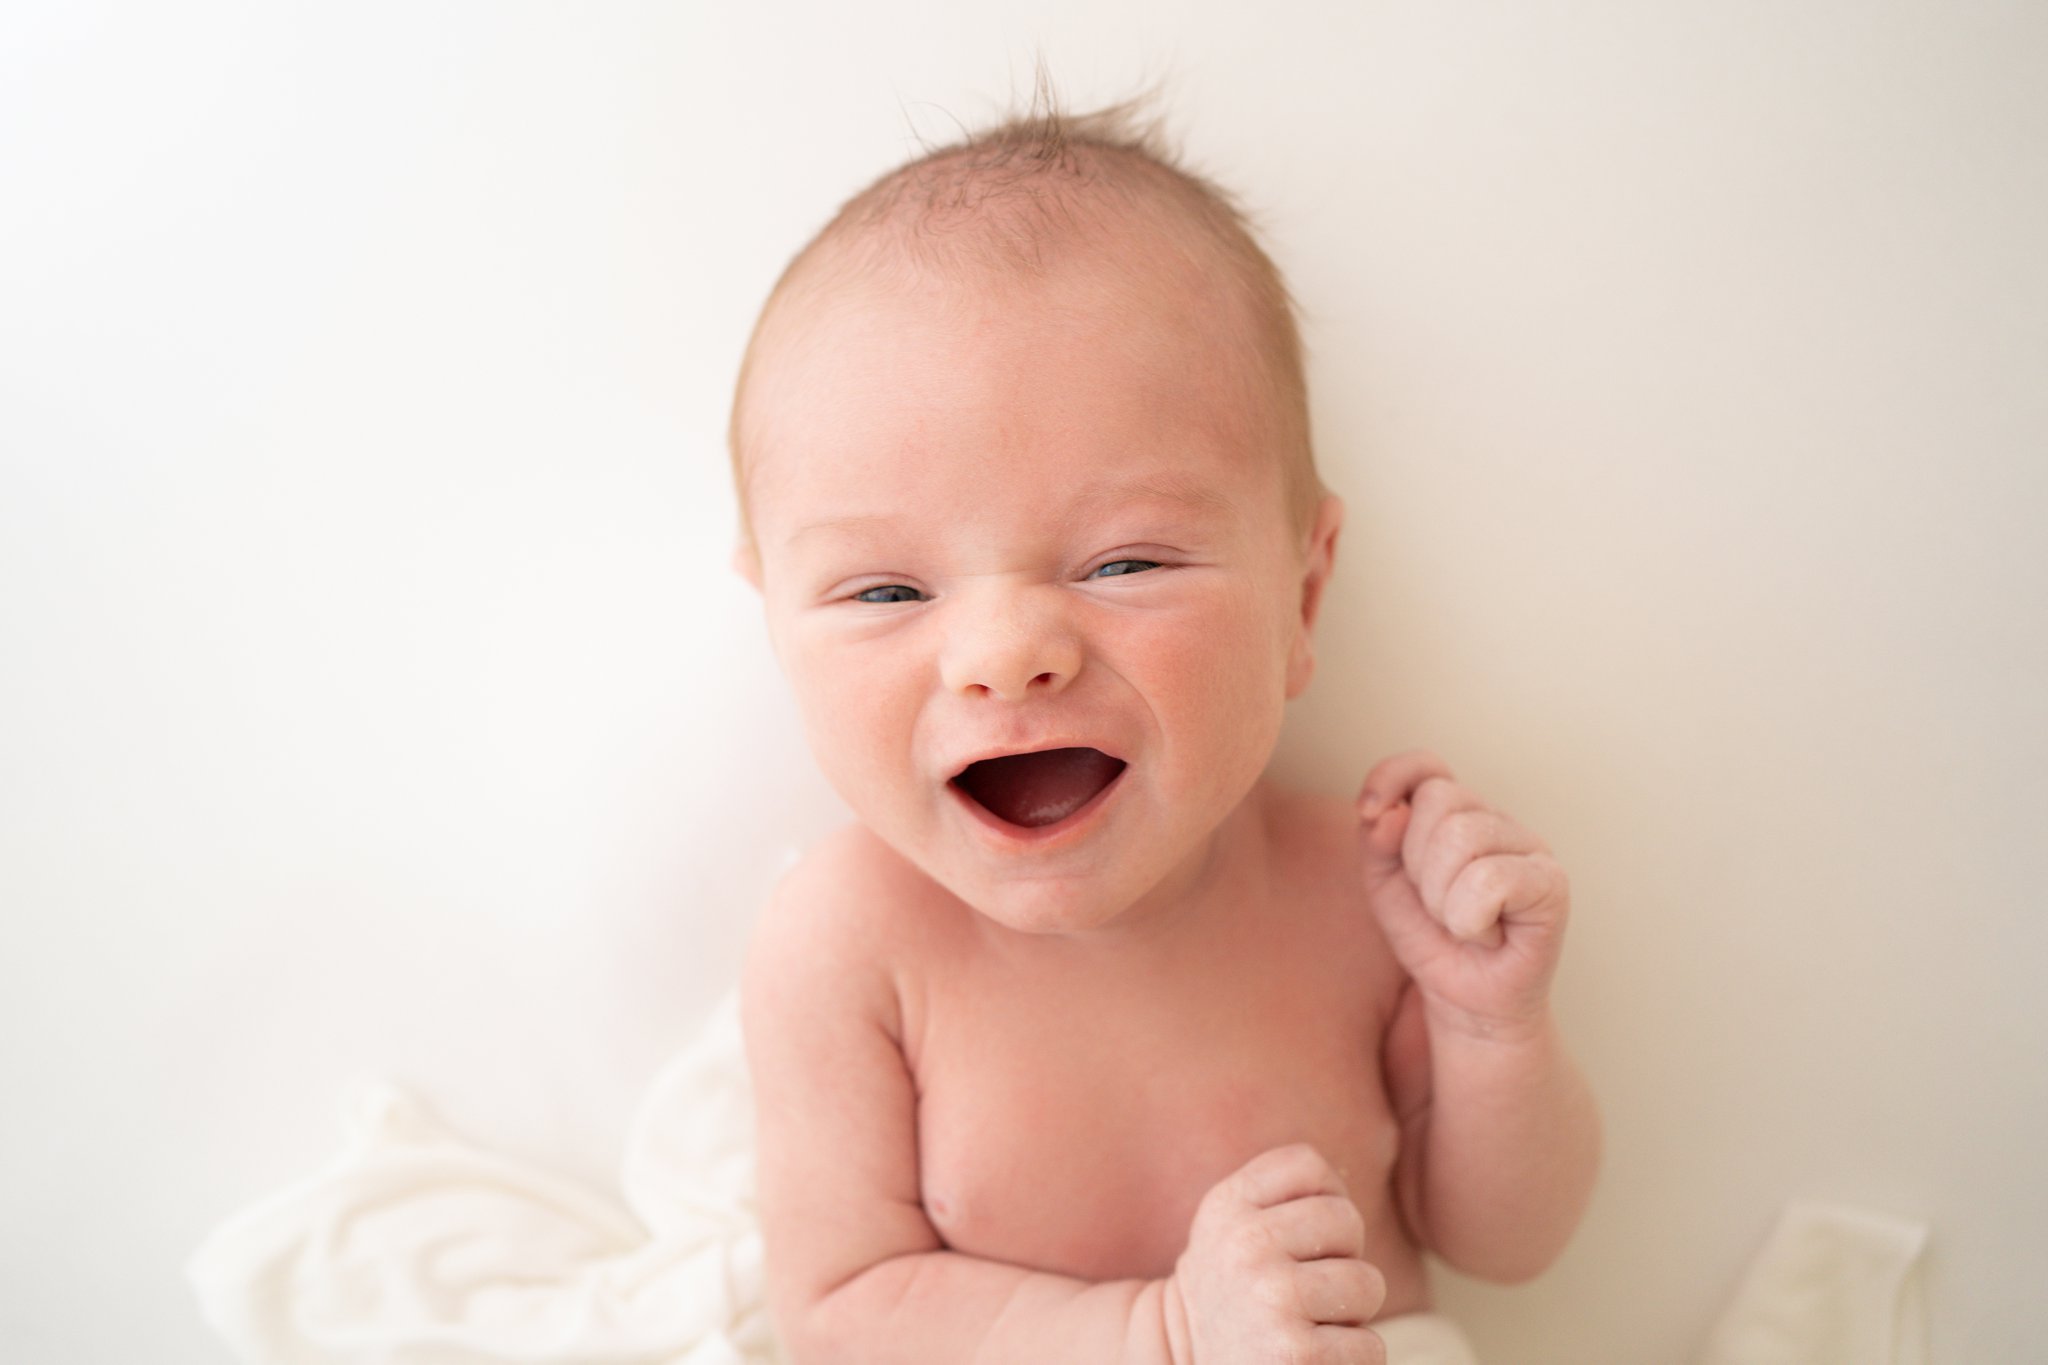 Newborn smiling at the photographer, laying on white backdrop in photography studio.